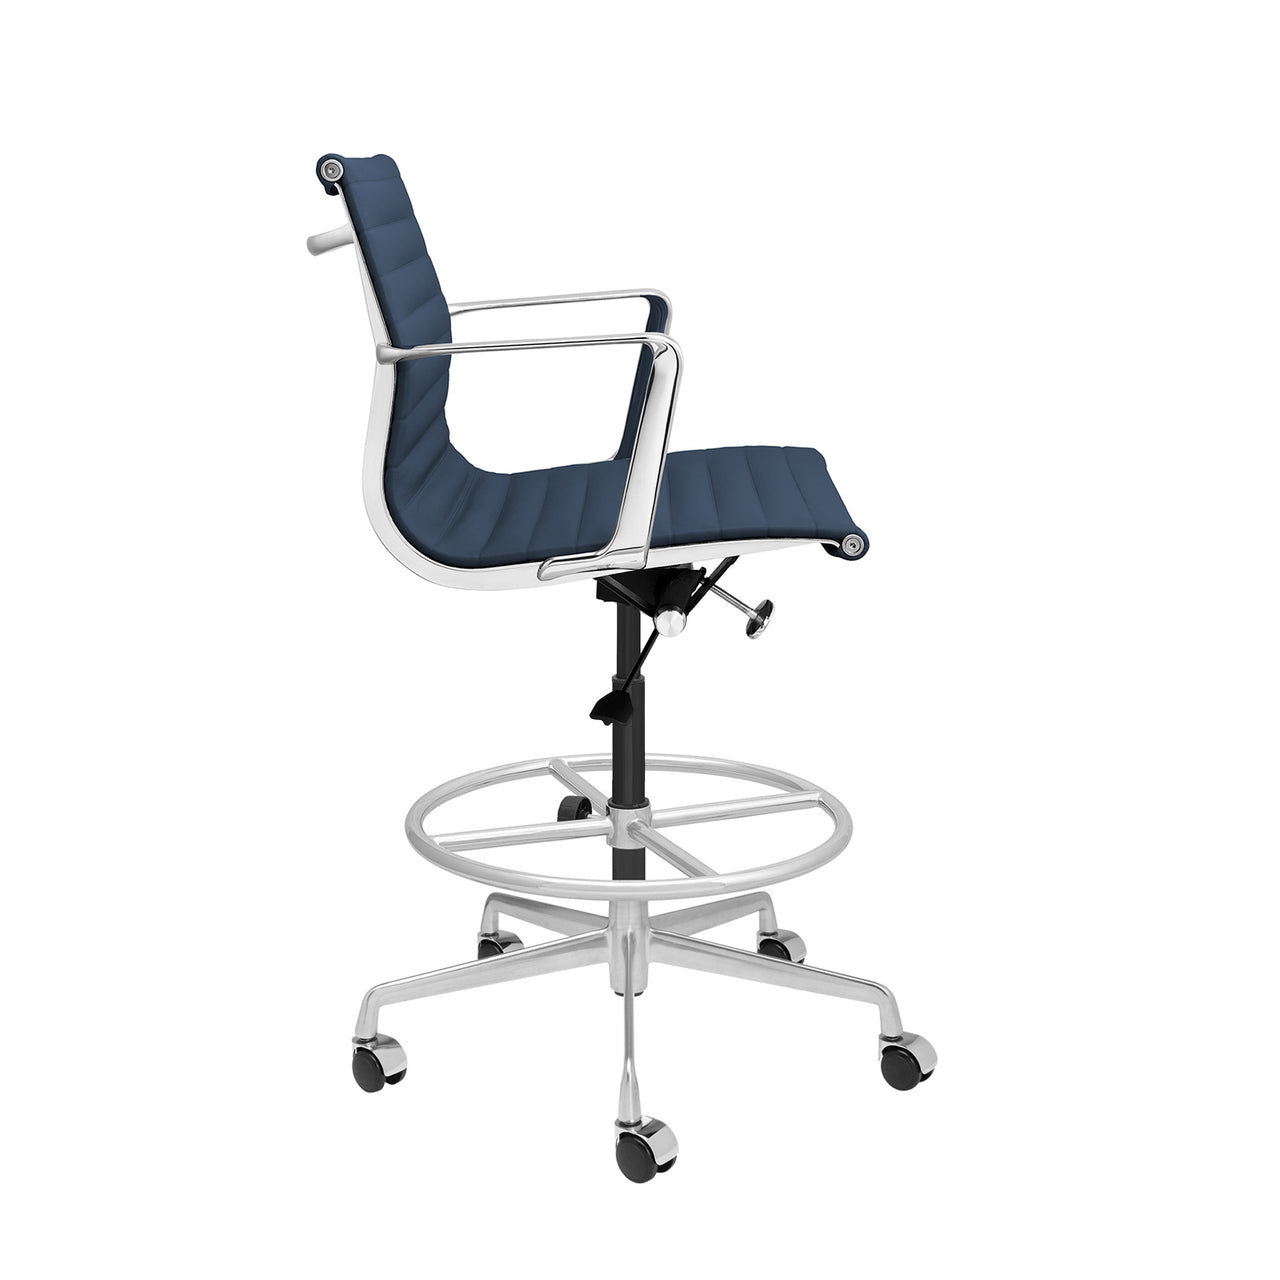 SHIPS JAN 30TH - Pro Ribbed Drafting Chair (Blue Italian Leather)